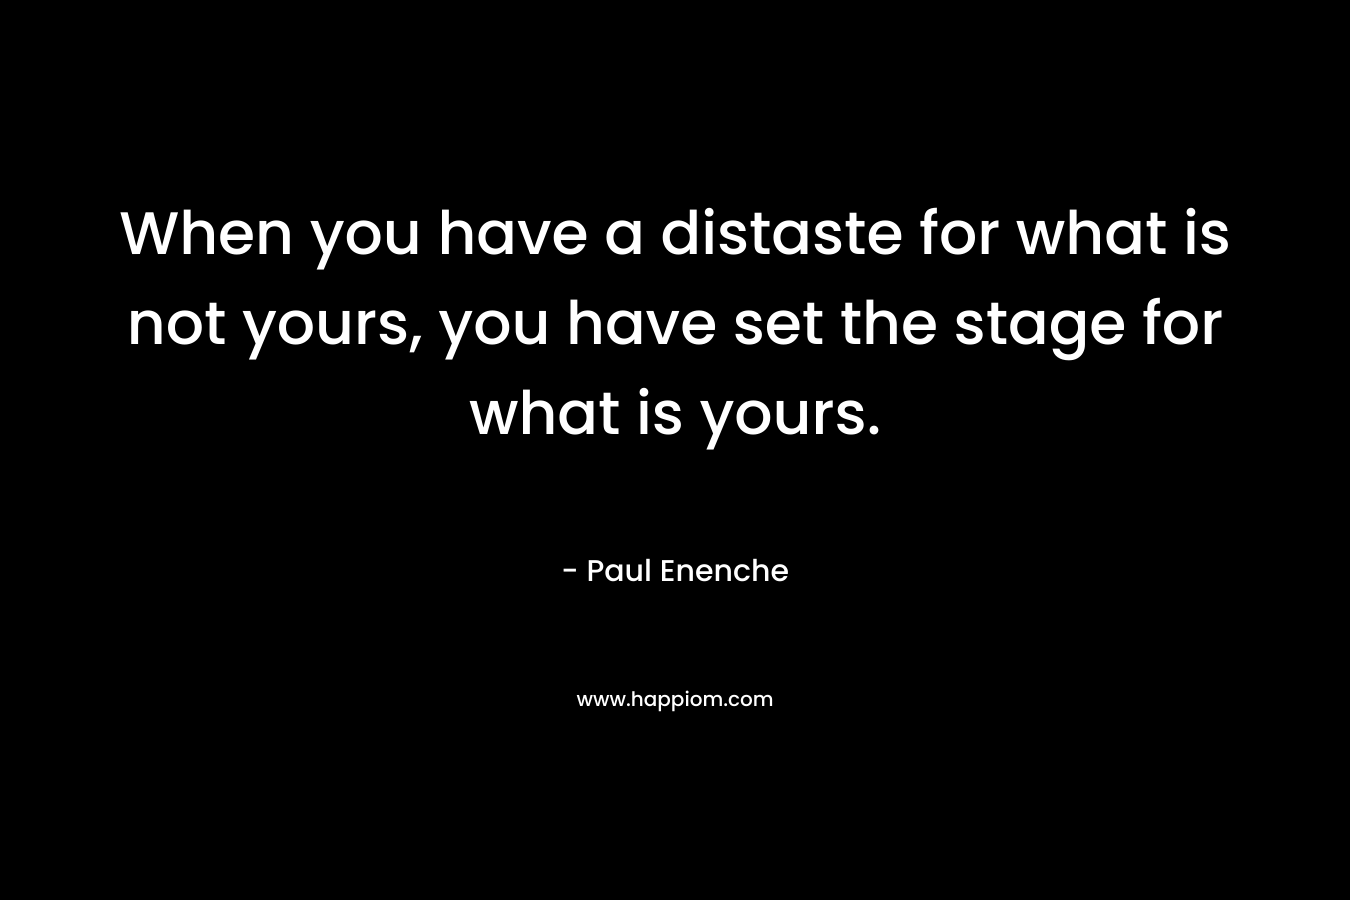 When you have a distaste for what is not yours, you have set the stage for what is yours.